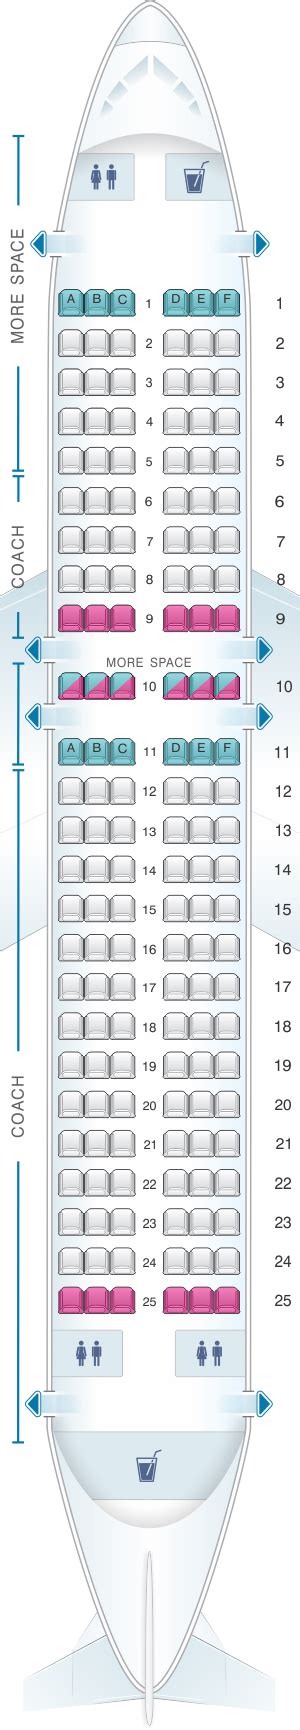 Seat Map jetBlue Airways Airbus A320. Airplane Airbus A320 jetBlue Airways with 2 classes and 162 seats on board. Use airplane seat map to find which ones are more comfortable and which should be avoided. Tap the seat on the map to see the details.. 